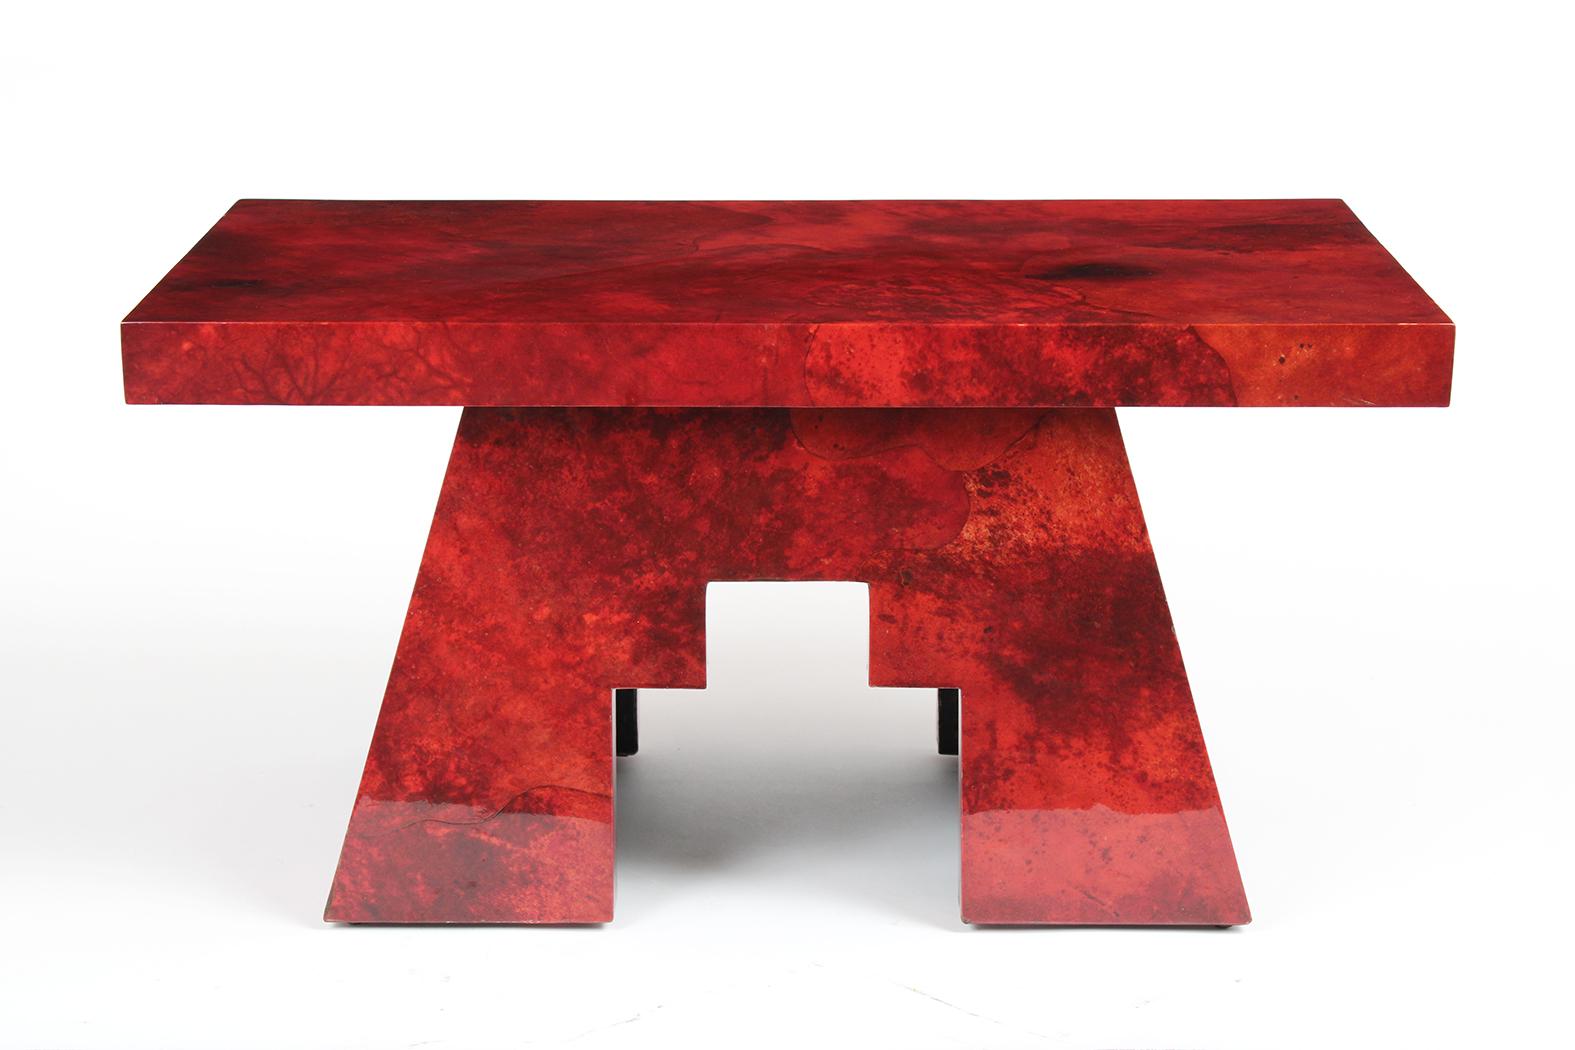 This 1980's Red Goatskin End Table by Aldo Tura is in great condition and has a unique design. The side table has a rectangular top, asymmetrical leg design, and is covered in a deep red-dyed color goatskin with a lacquered finish. This Vintage Side